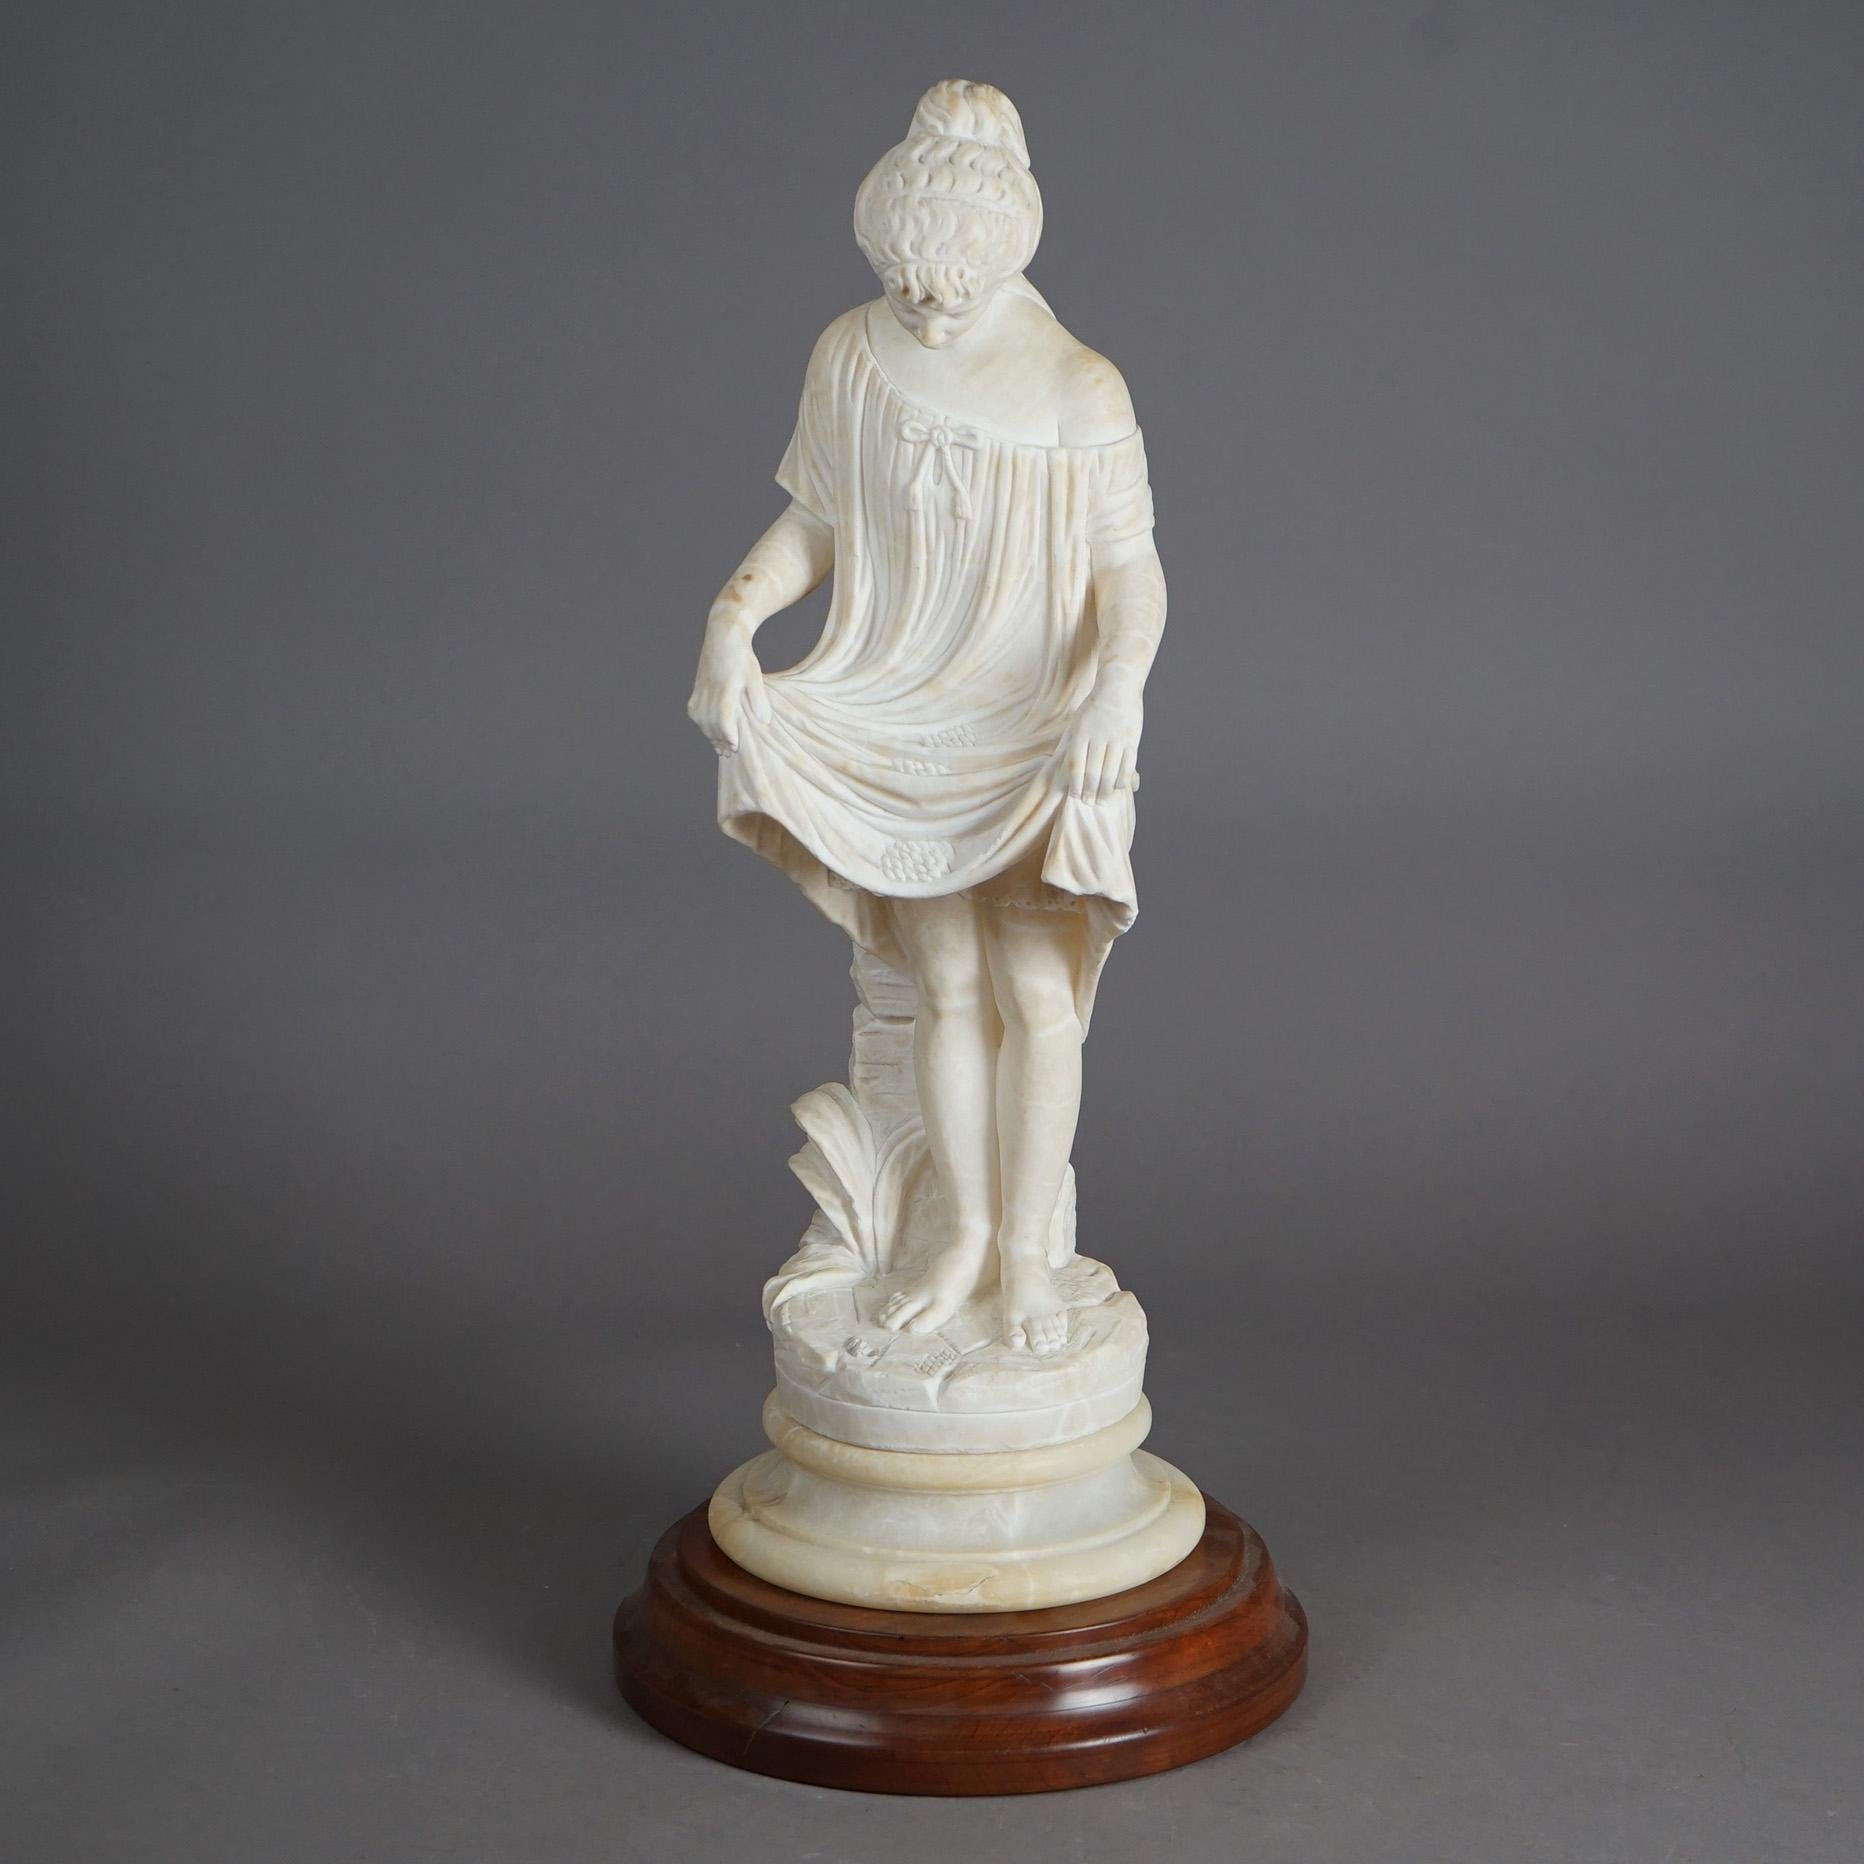 An antique Classical sculpture offers carved alabaster young girl in countryside setting, seated on circular plinth, 19th century

Measures - 24.5